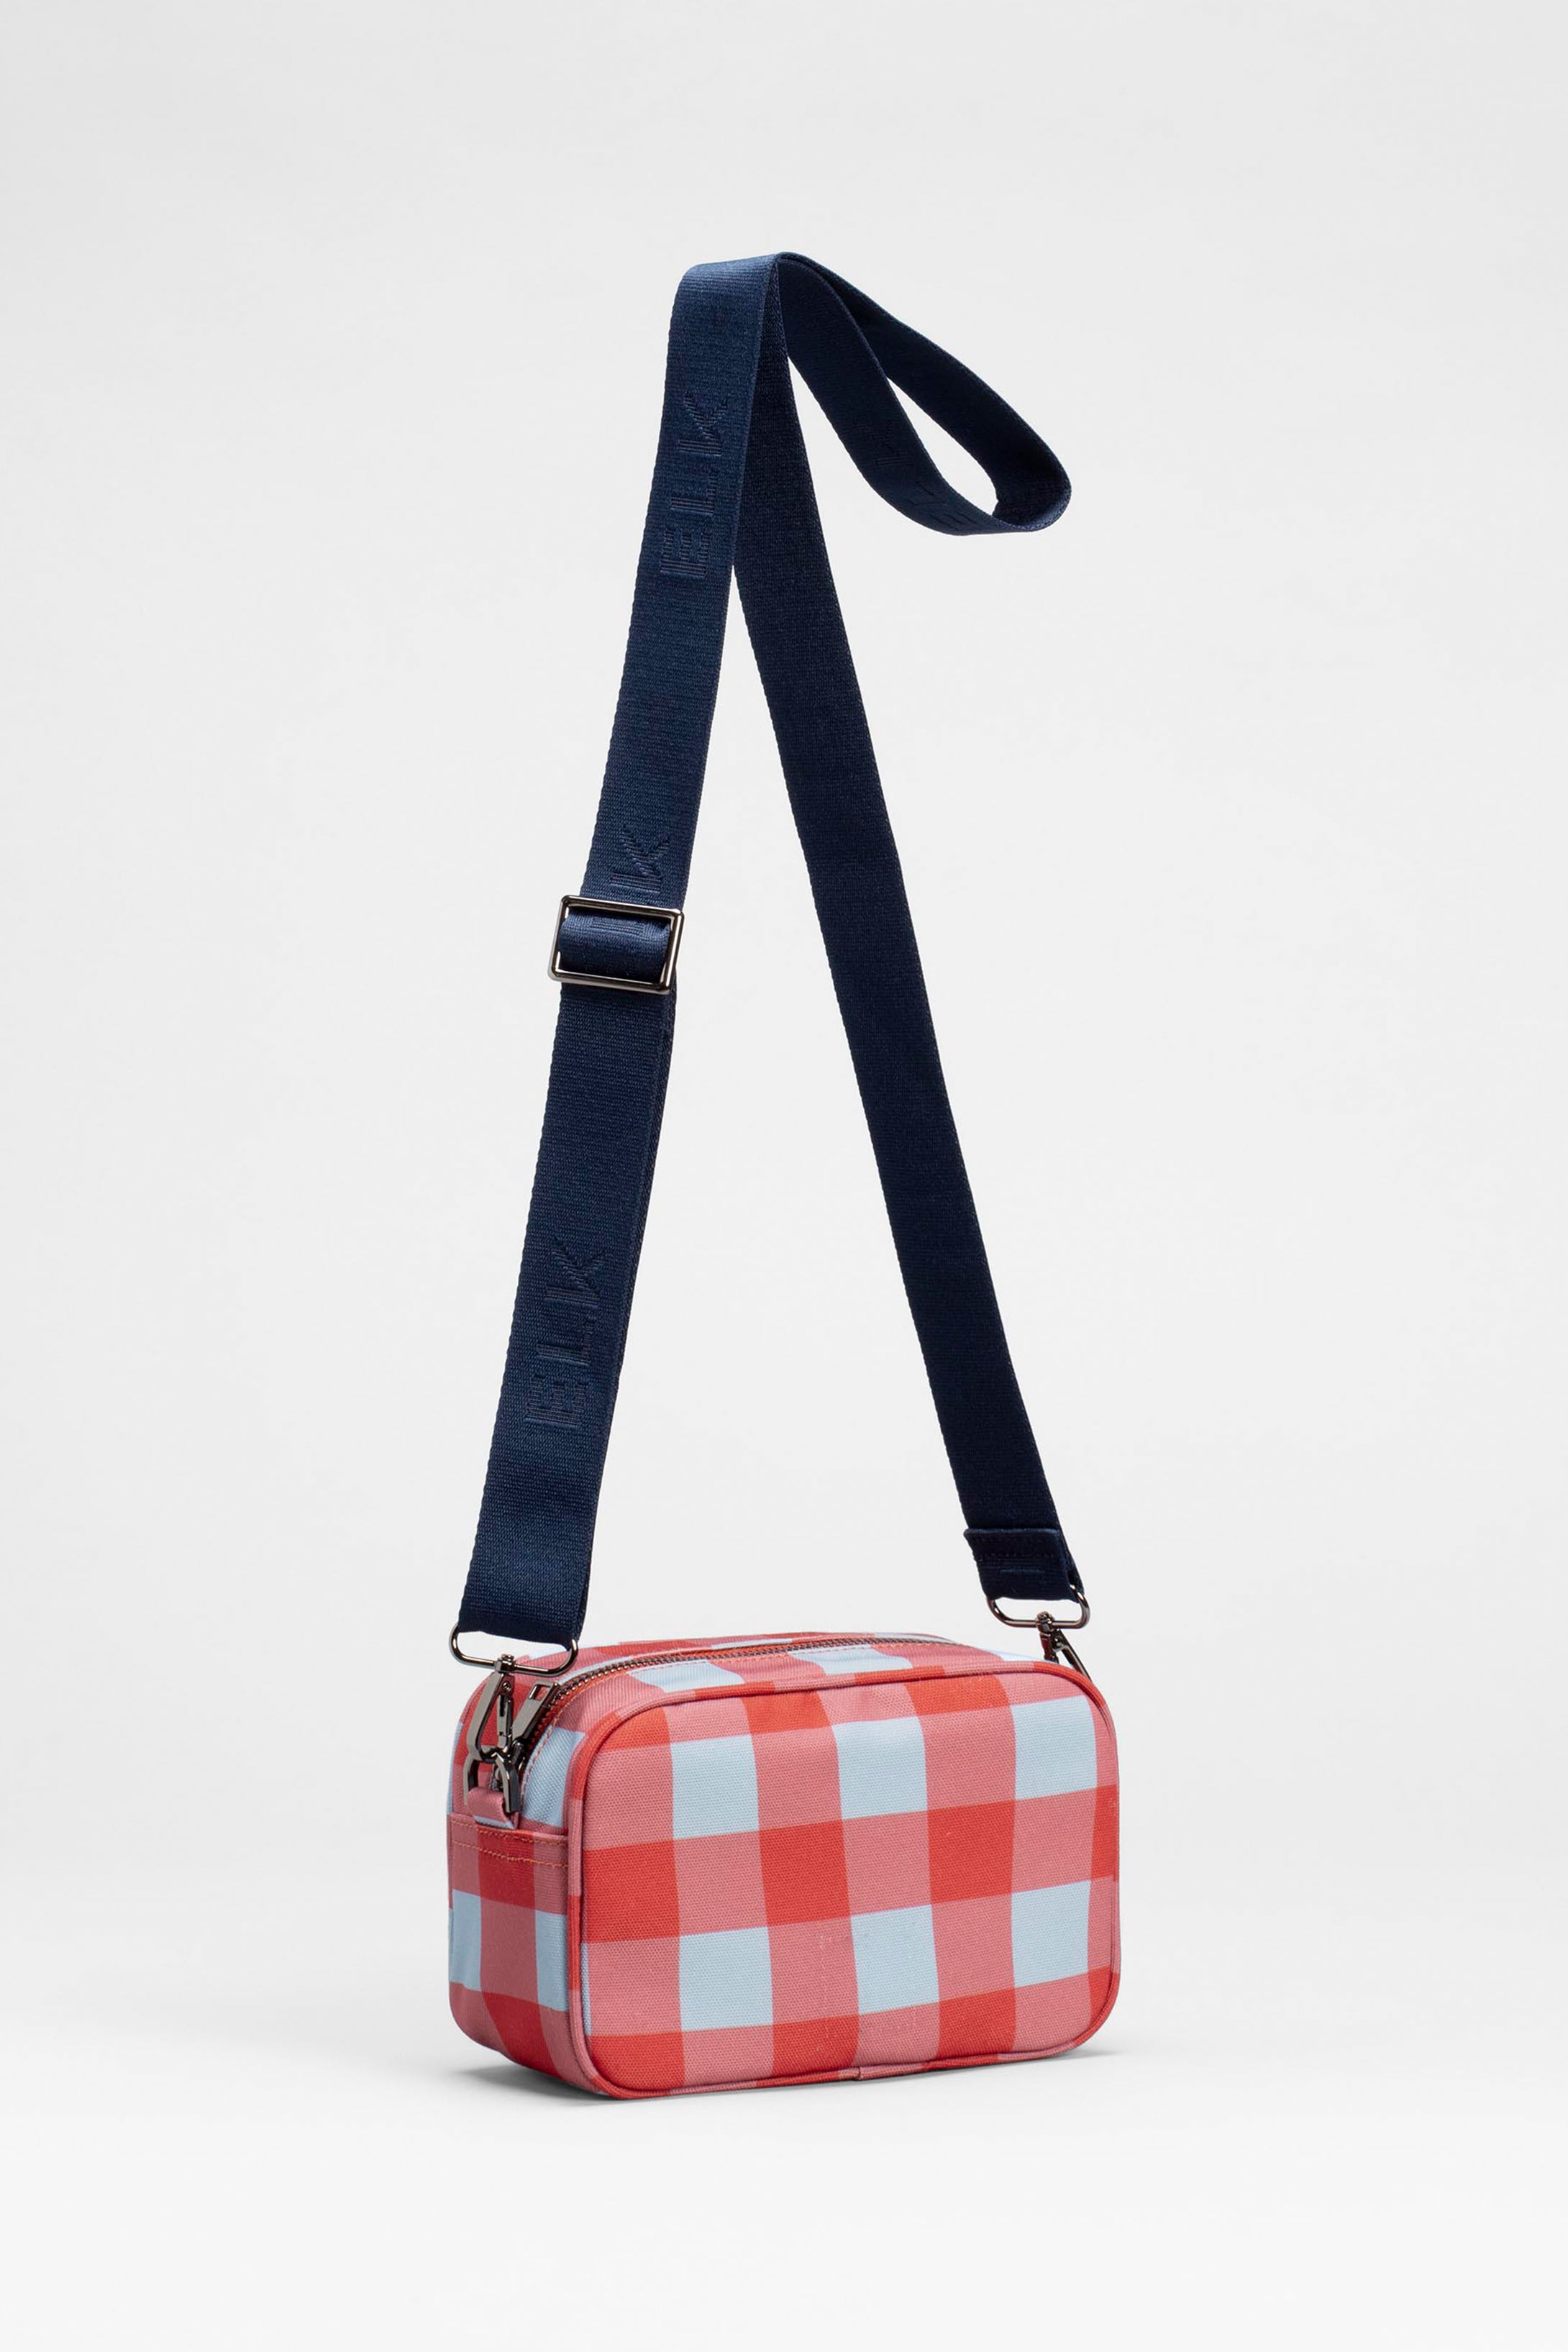 Kassel Recycled Fabric Gingham Print Zip Up Cross Body Bag Front | RED POWDER BLUE GINGHAM